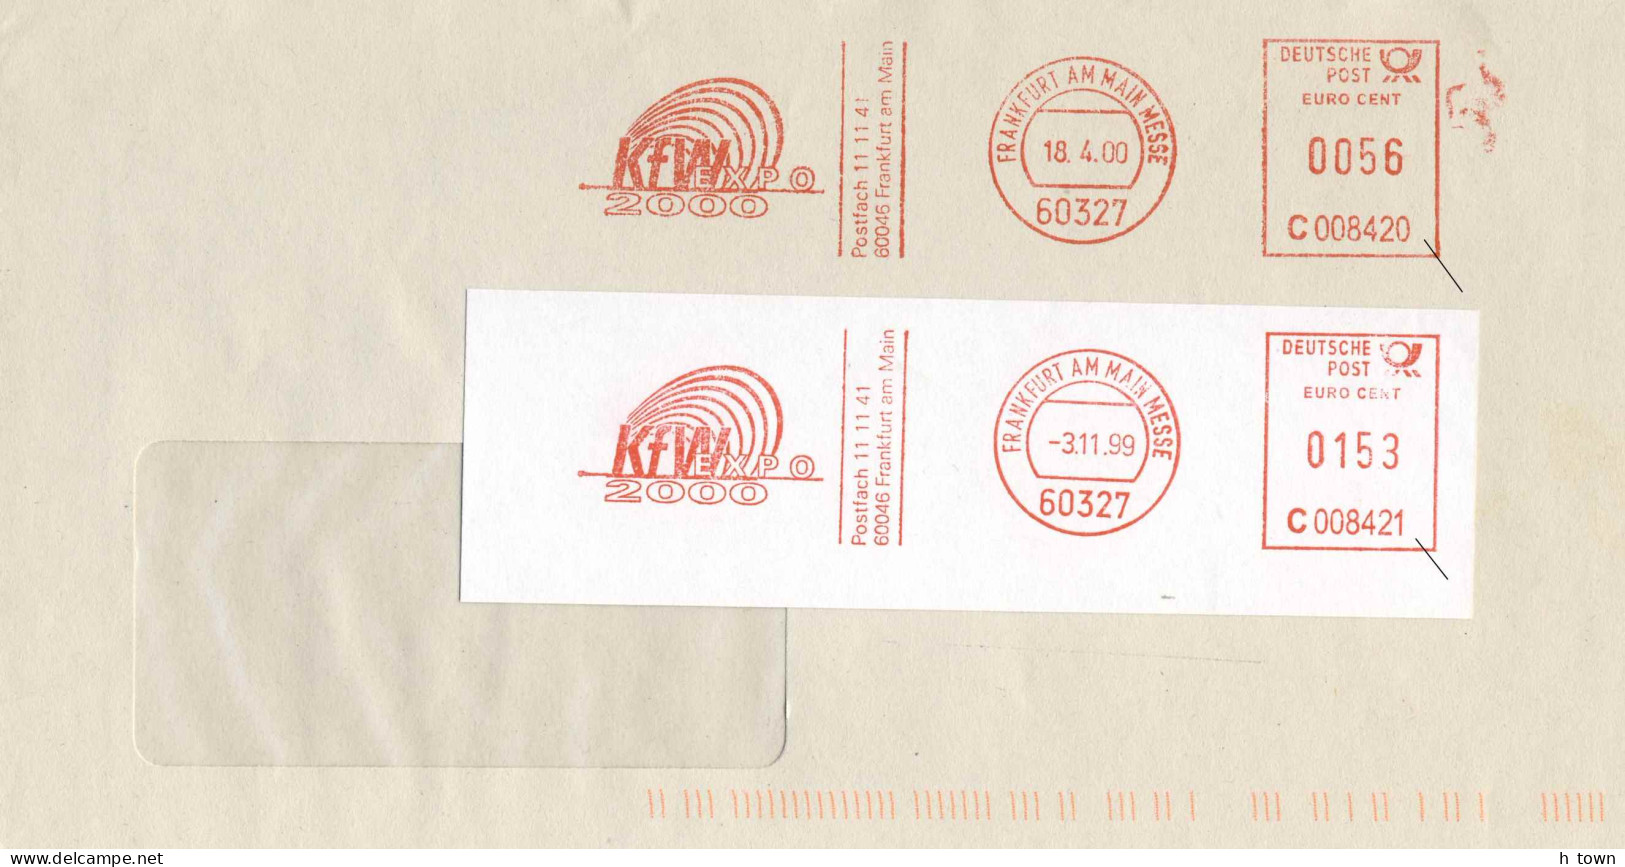 621  Exposition Universelle De 2000, Hanovre - World's Fair EXPO 2000 Hannover. 2 Meter Stamps KfW "Frankfurt Fair" - 2000 – Hannover (Germania)